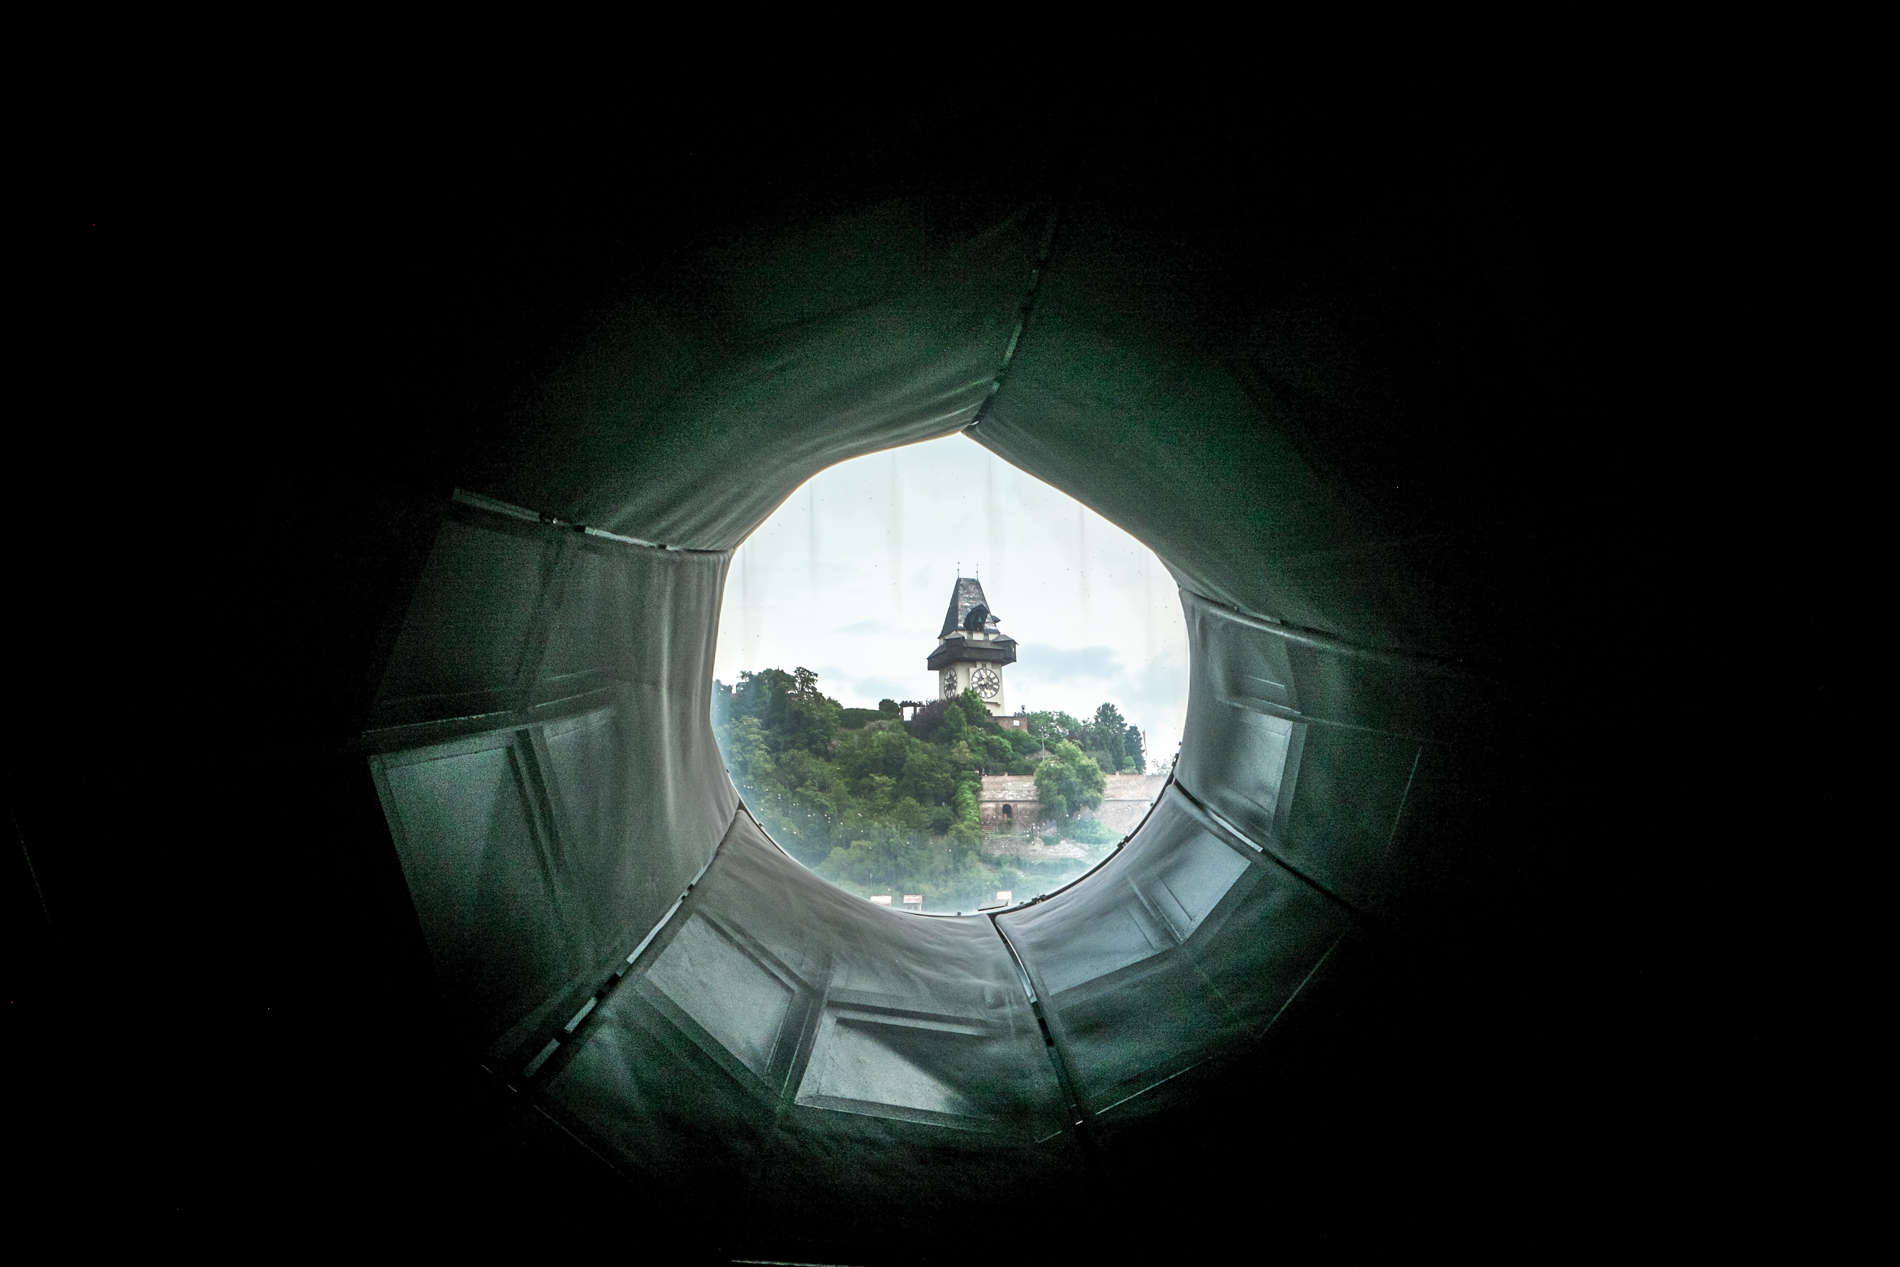 View of the Graz clocktower on the hill from a portal window inside the Kunsthaus modern art museum roof.